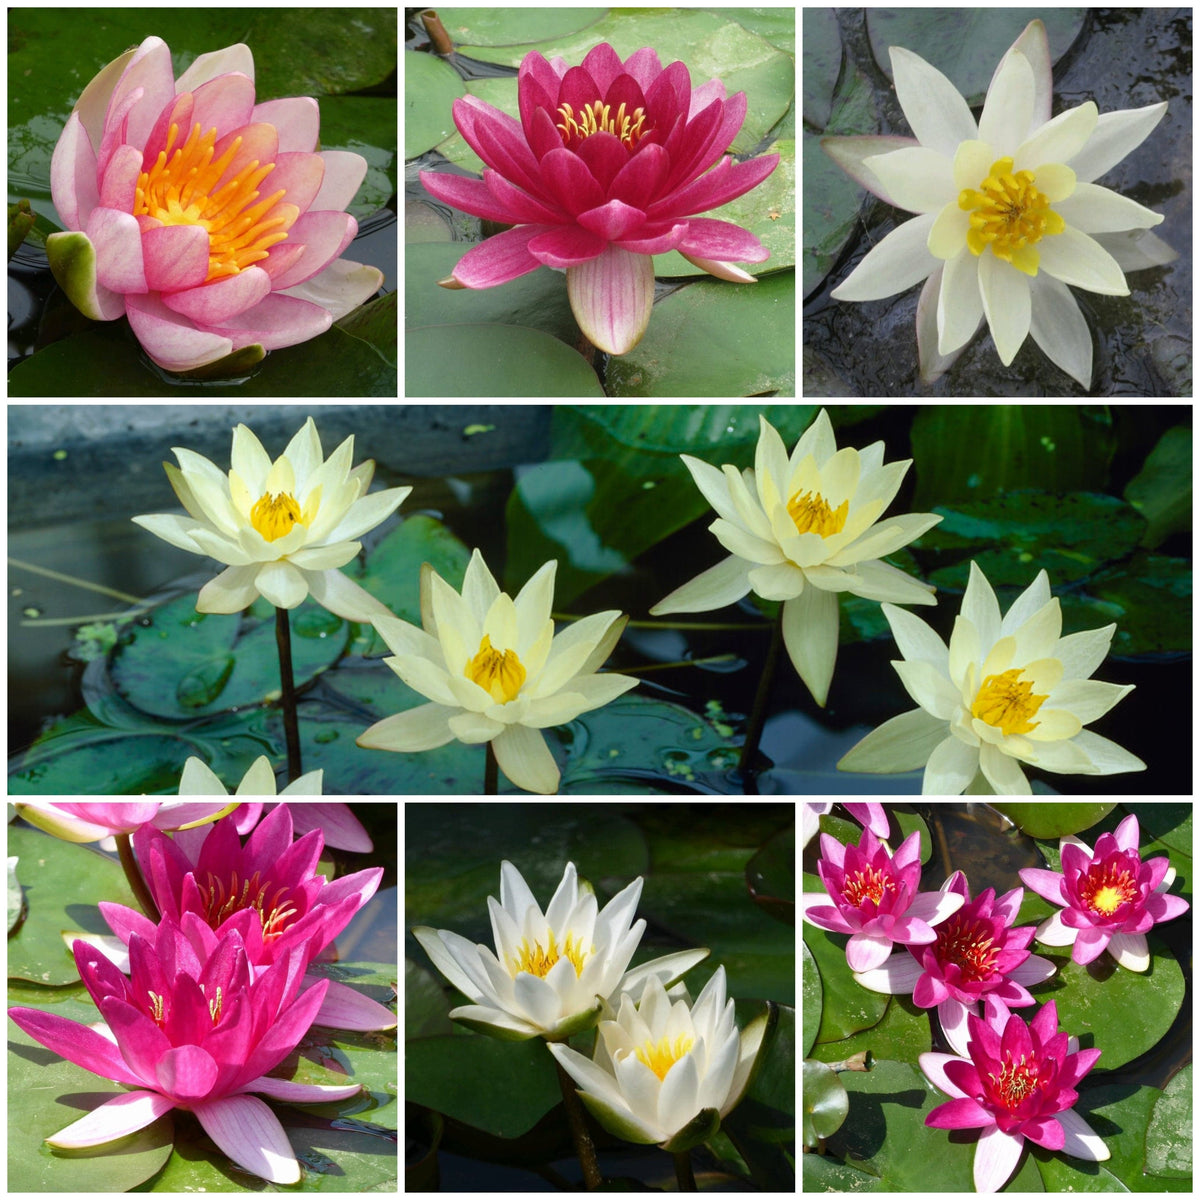 Best Water Lily Plants For Any Size Pond | Growers' Choice - Roots Plants